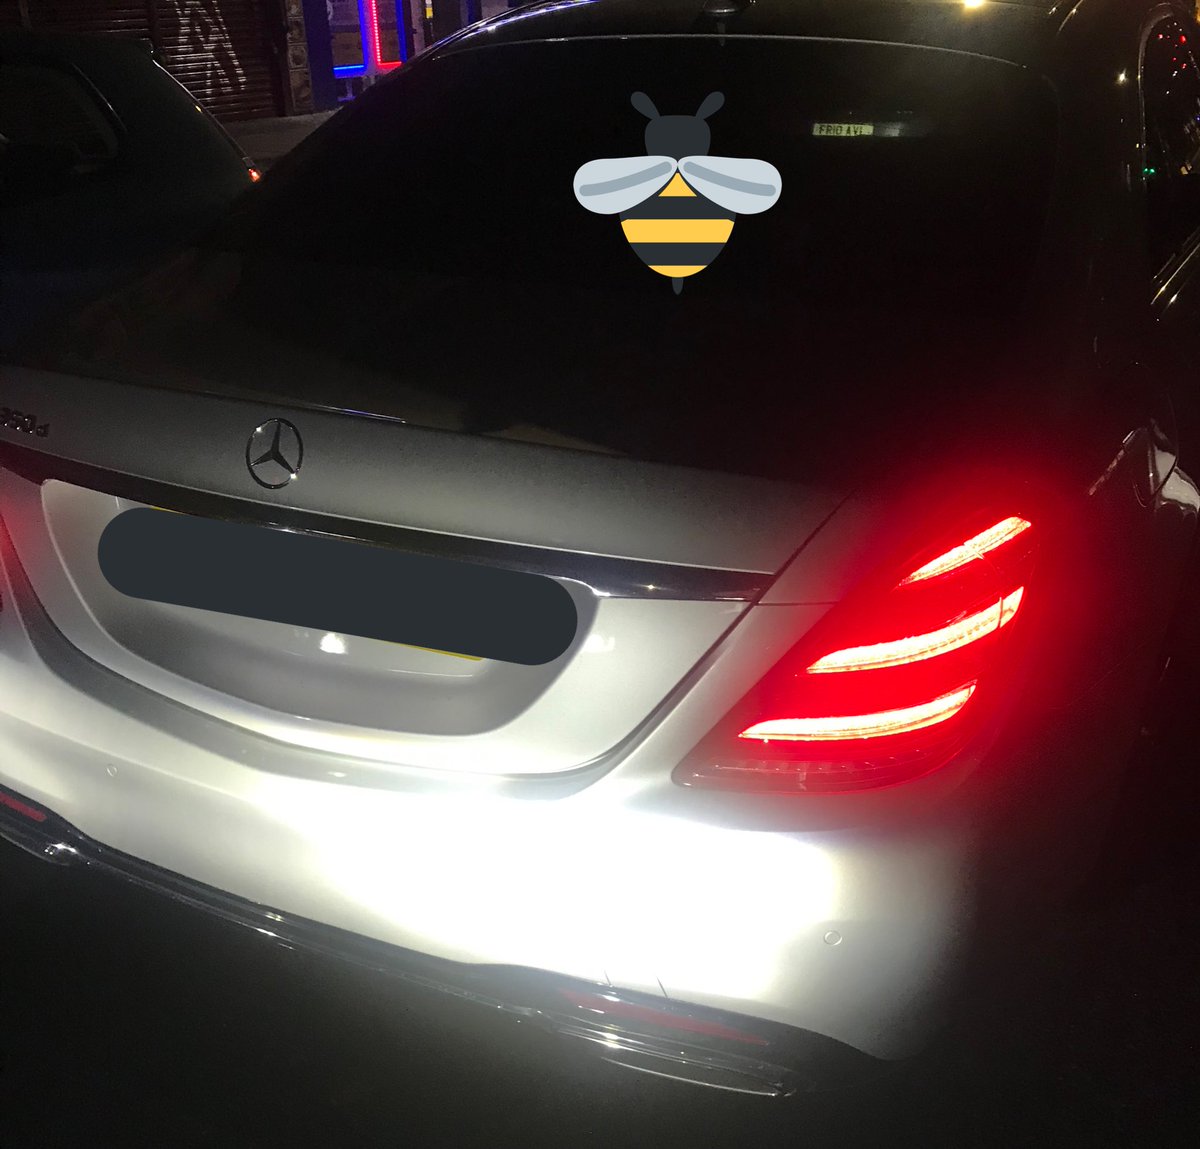 #Recovered #MercedesSclass  @MPSLimehouse area. Full tints on windows and driver blowing #HippyCrack loads canisters found inside car. Returned to lawful owner. #DisruptingCriminality #TogetherWeCan @MPSRTPC 🎣🐝